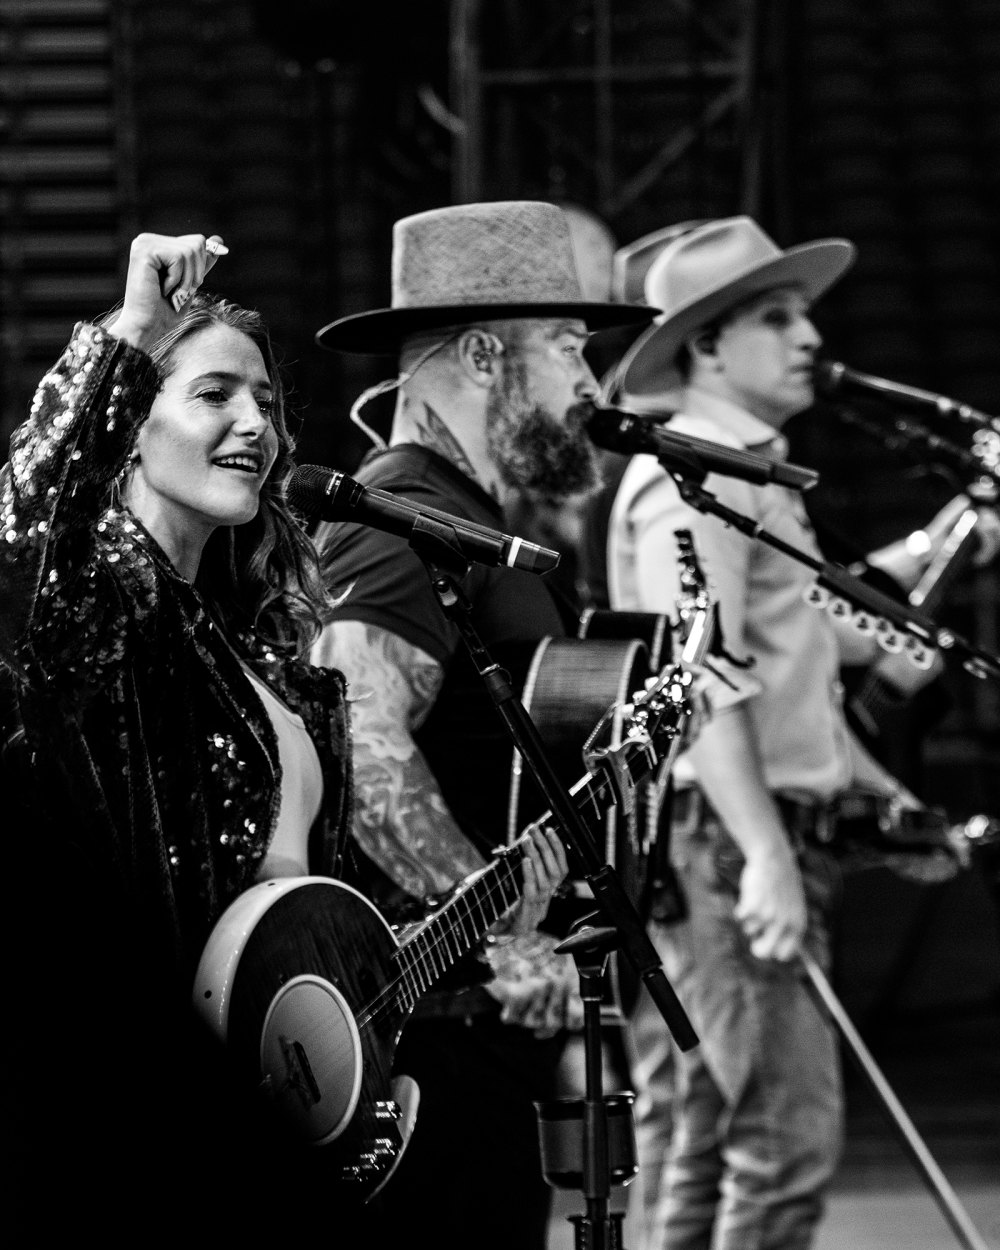 Caroline Jones, the Only Female Member of Zac Brown Band, Talks Country Music, Motherhood and More